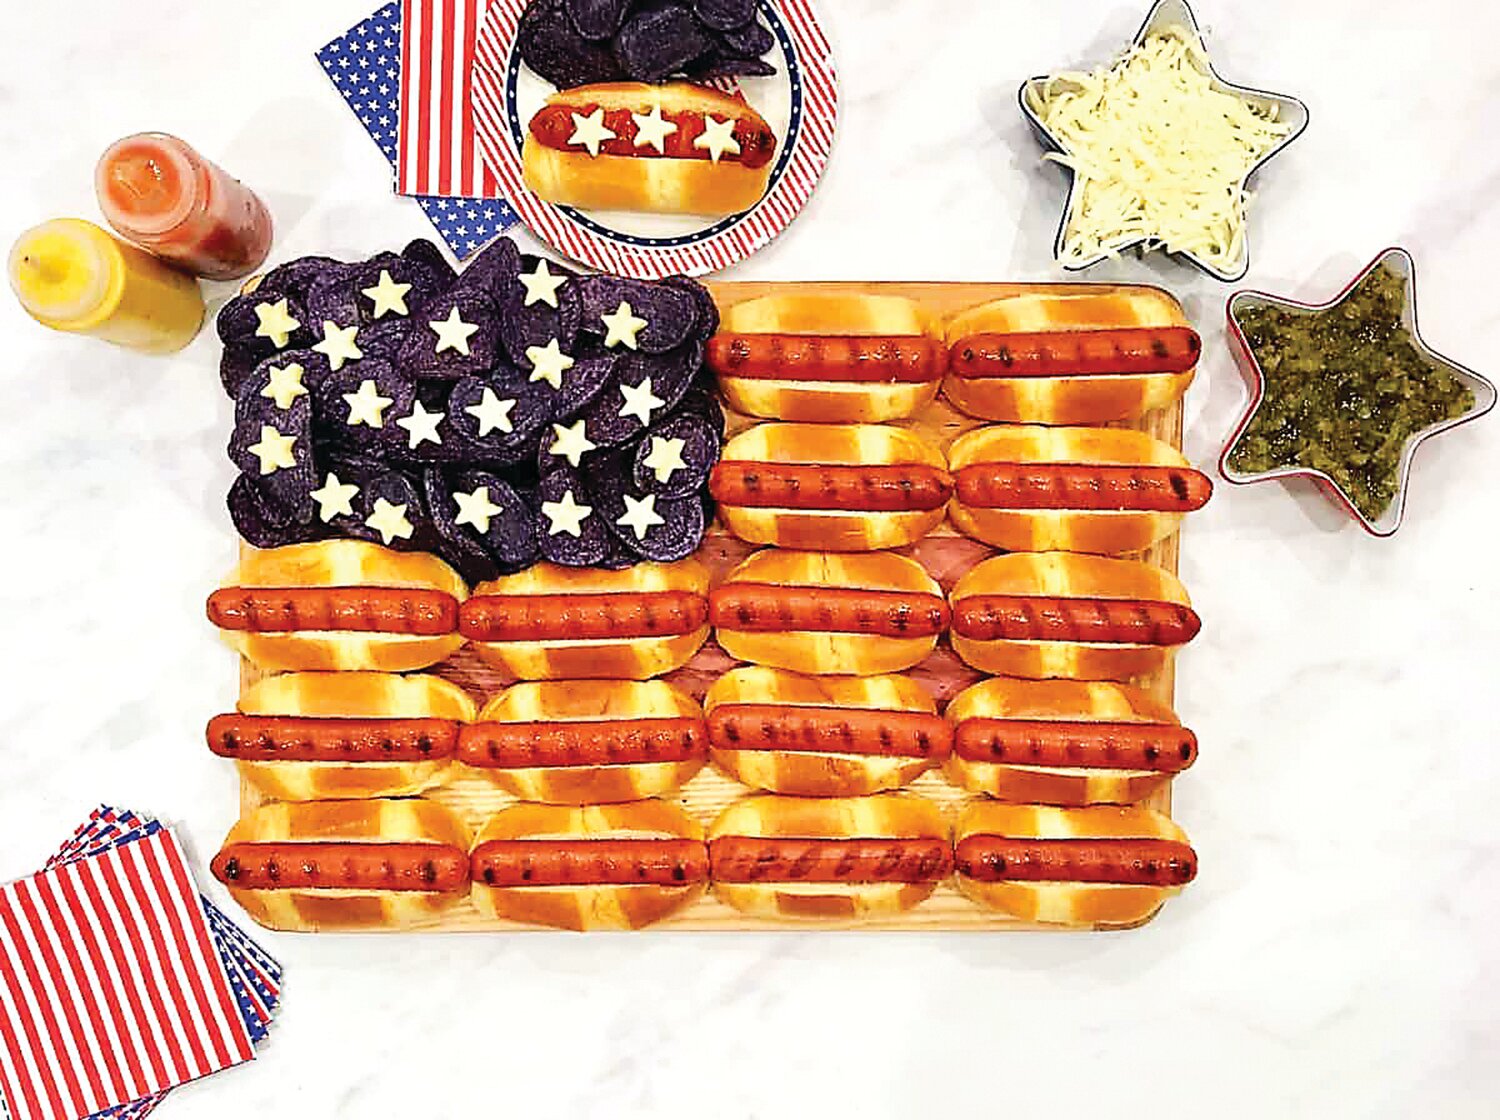 Hurrah for the flag on the Fourth of July.  There are many ways you can display food with a patriotic theme for the holiday; this one is hot dogs, blue corn chips and stars cut from slices of cheese.